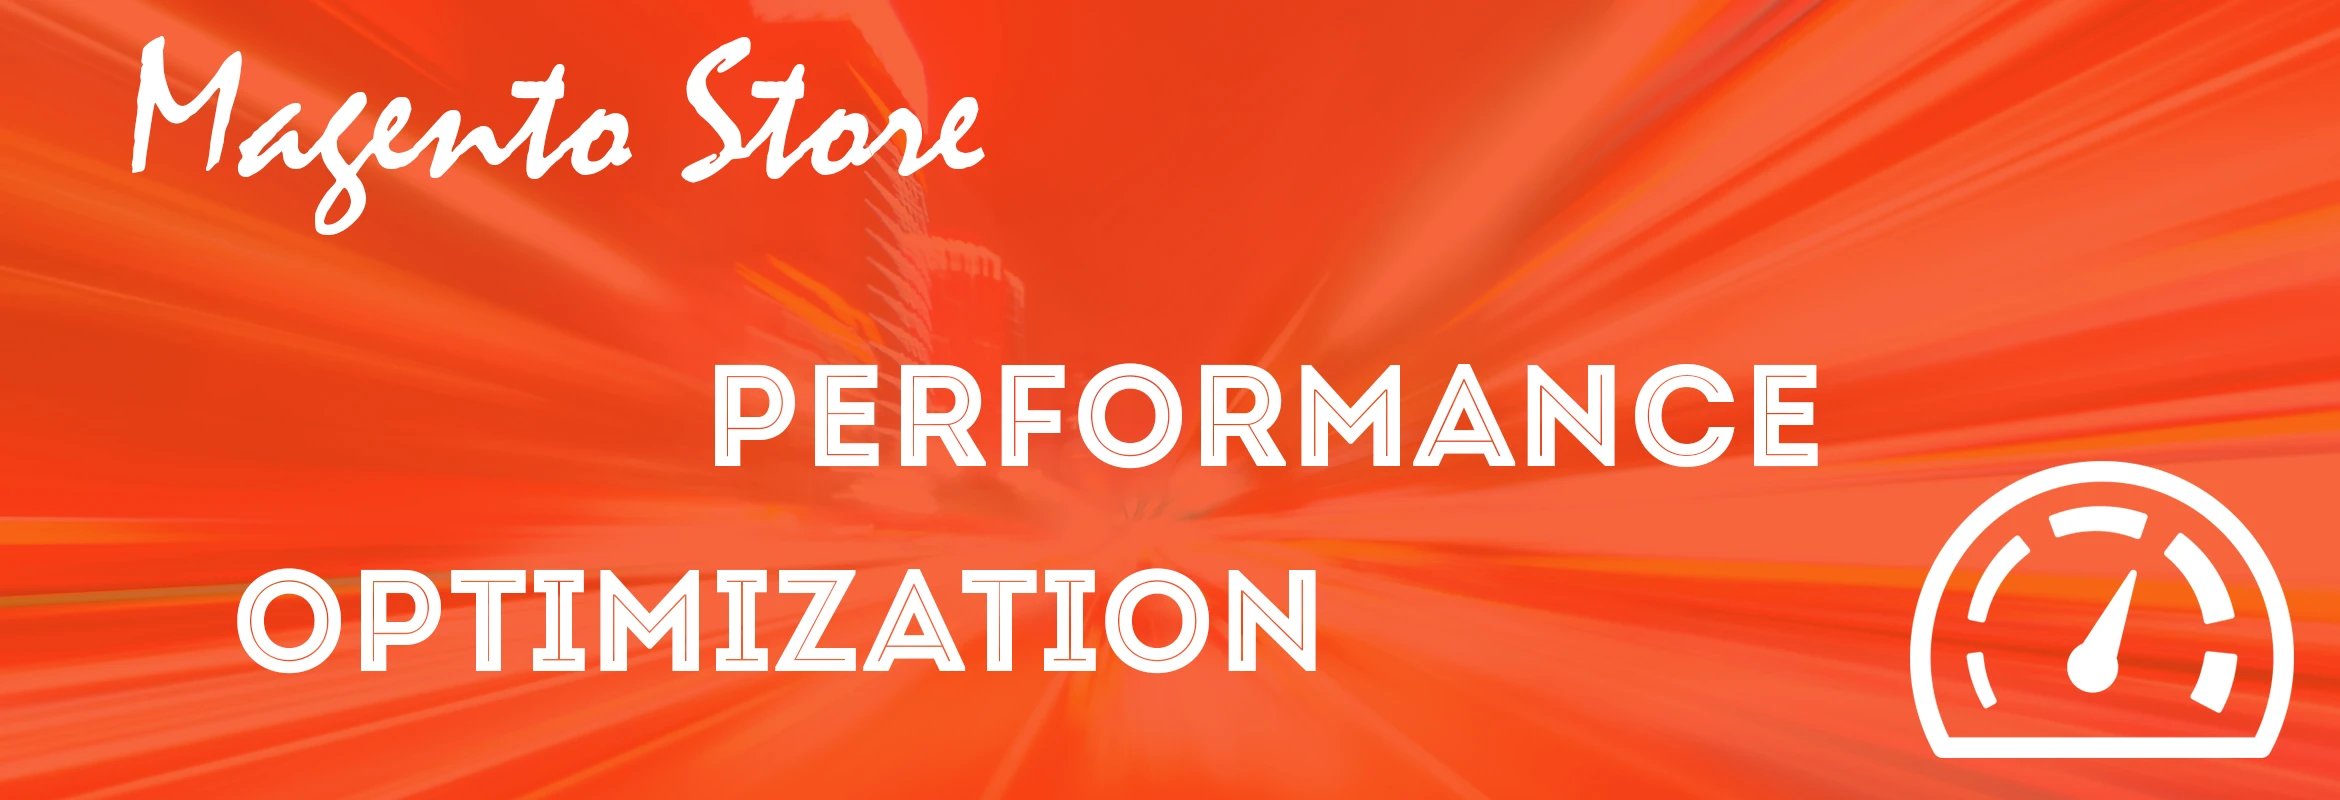 Magento Store Performance Optimization: Full Page Cache Is A Must